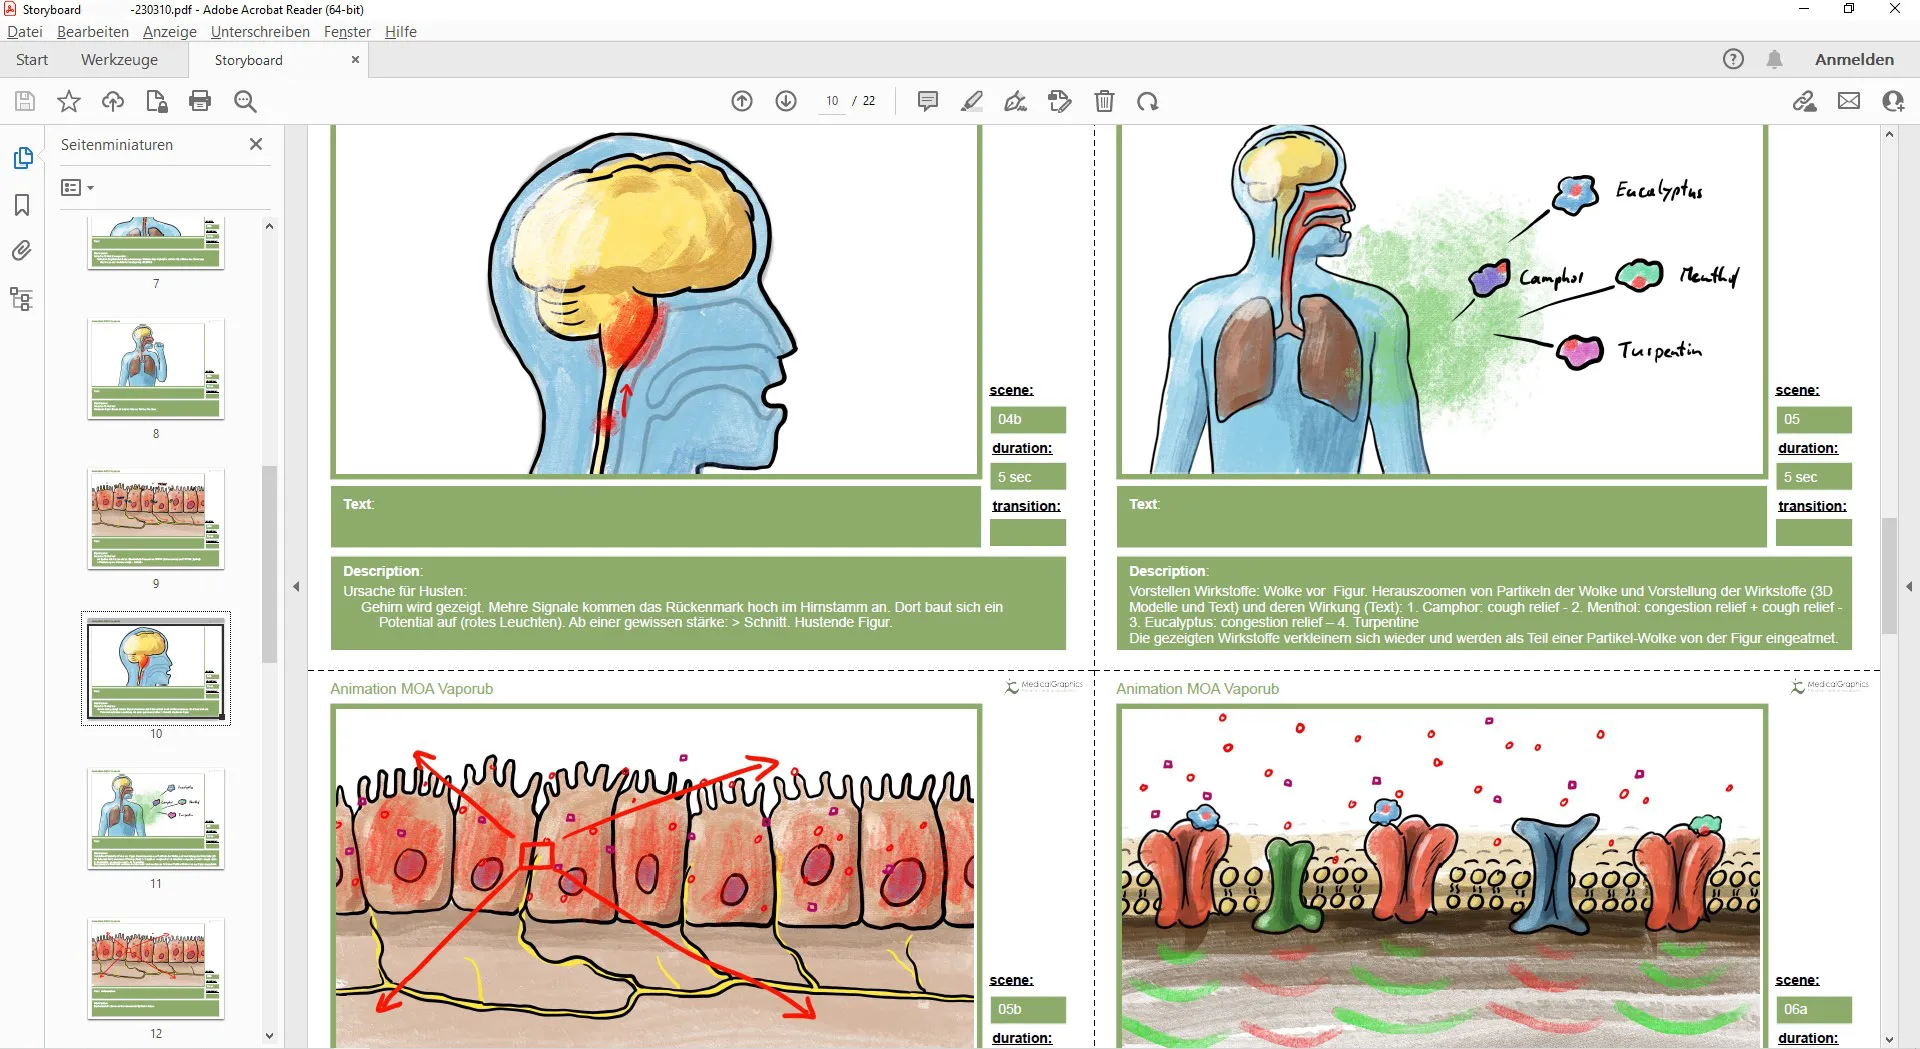 Storyboard animation on respiratory tract infections